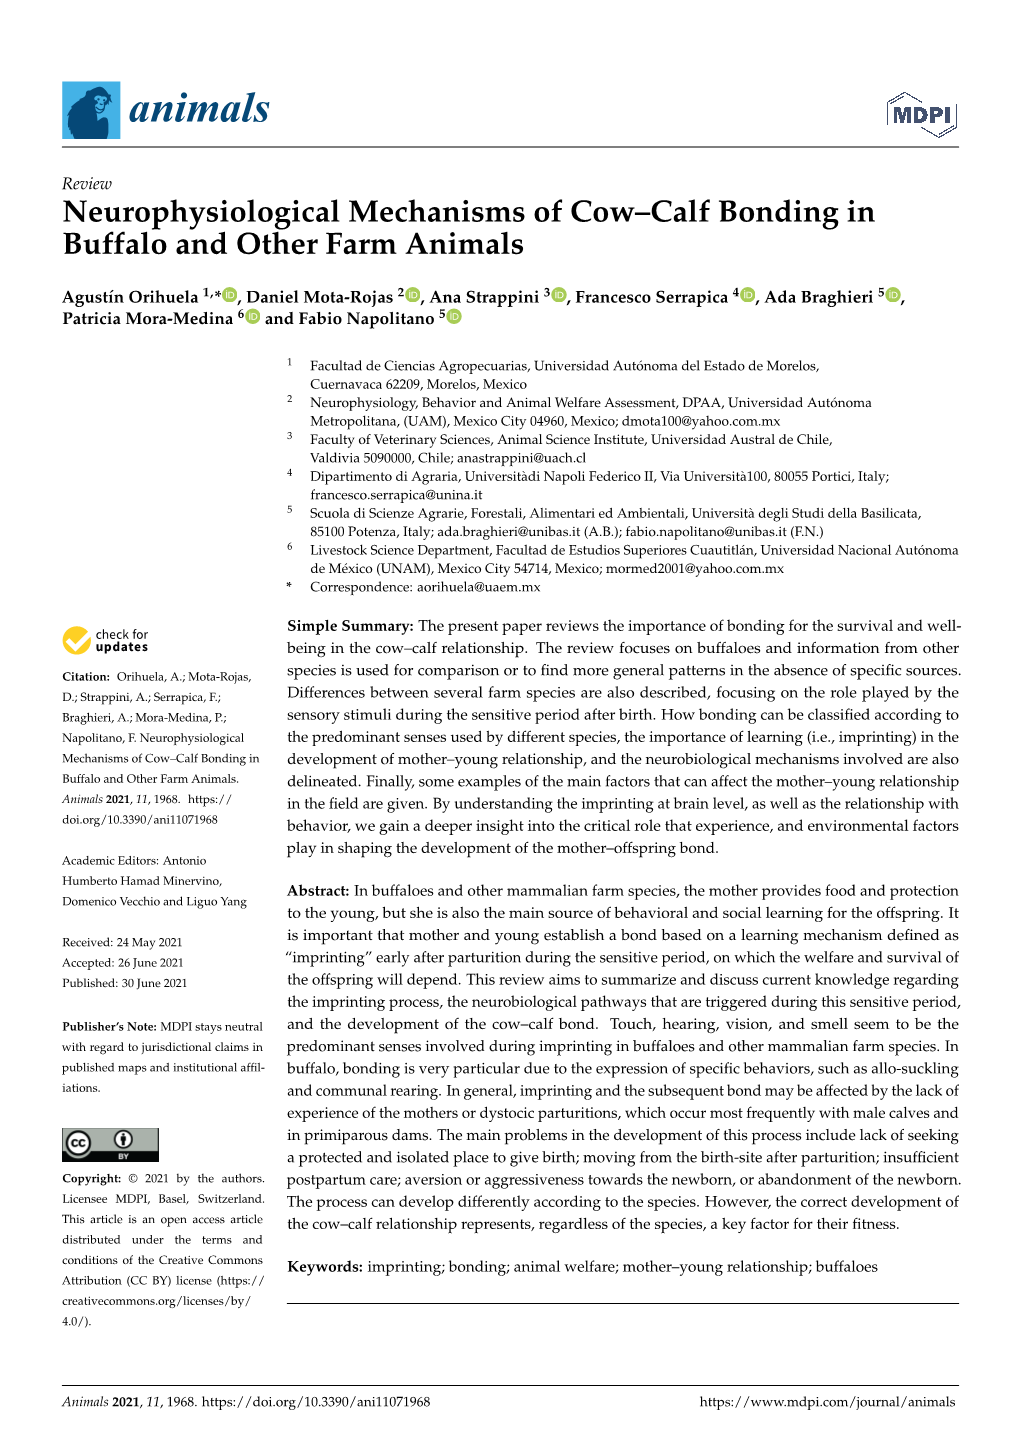 Neurophysiological Mechanisms of Cow–Calf Bonding in Buffalo and Other Farm Animals